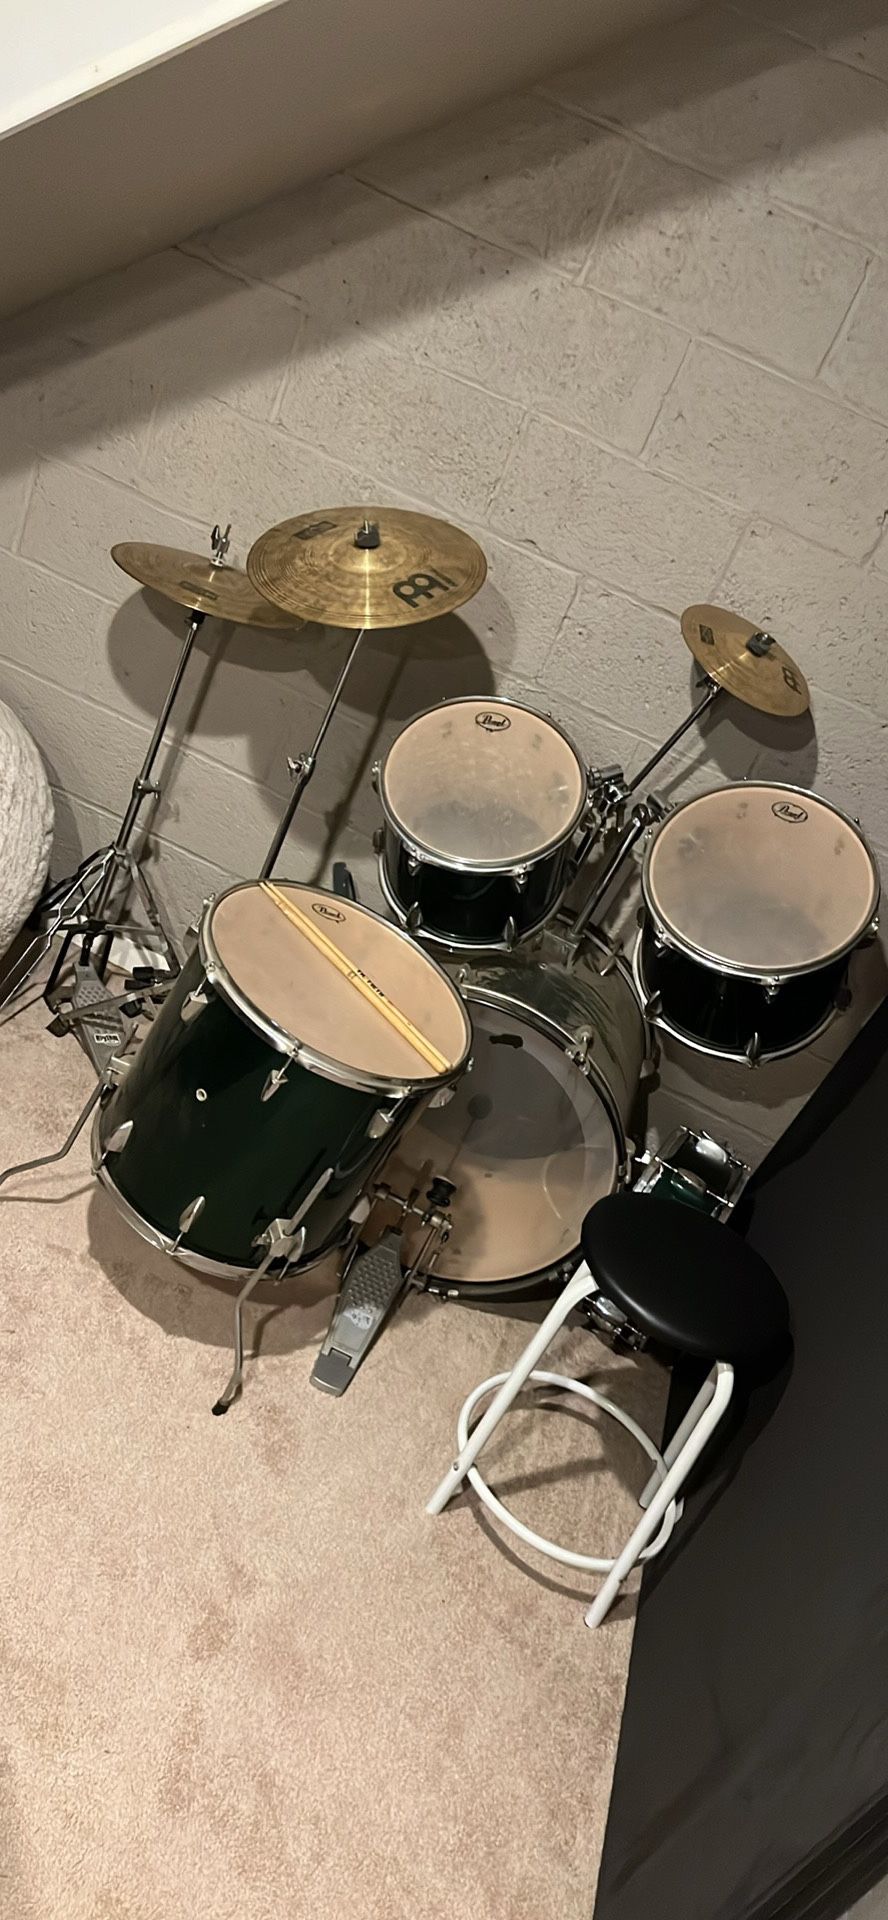 Drum Set (Price Can Be Negotiated)